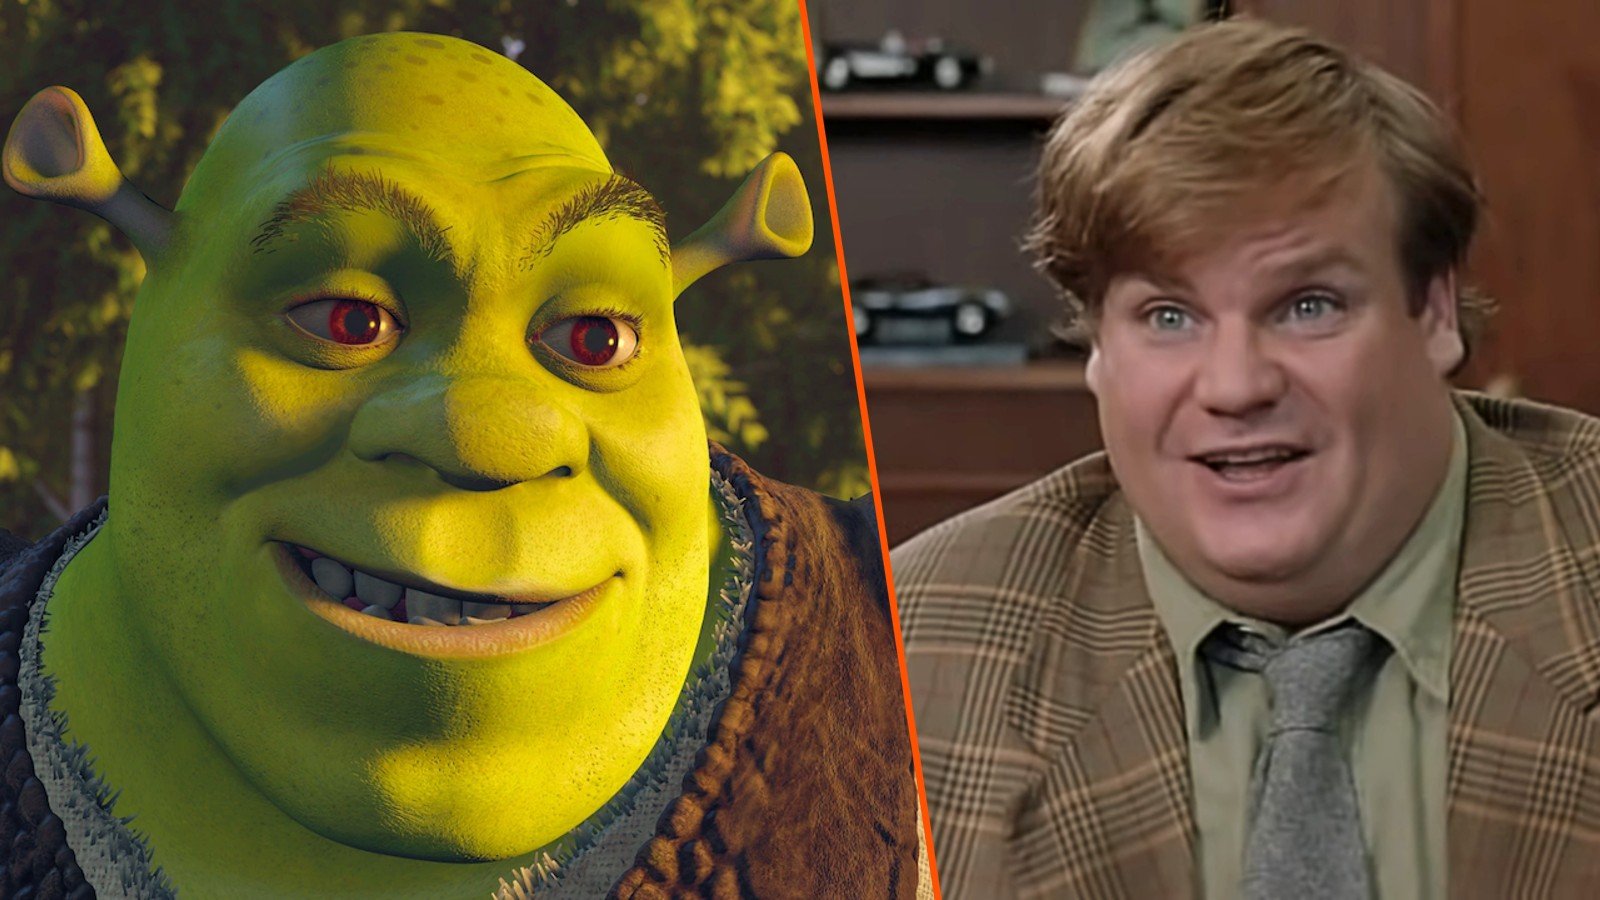 Lost media enthusiasts uncover early Chris Farley-era test animations for ‘Shrek’